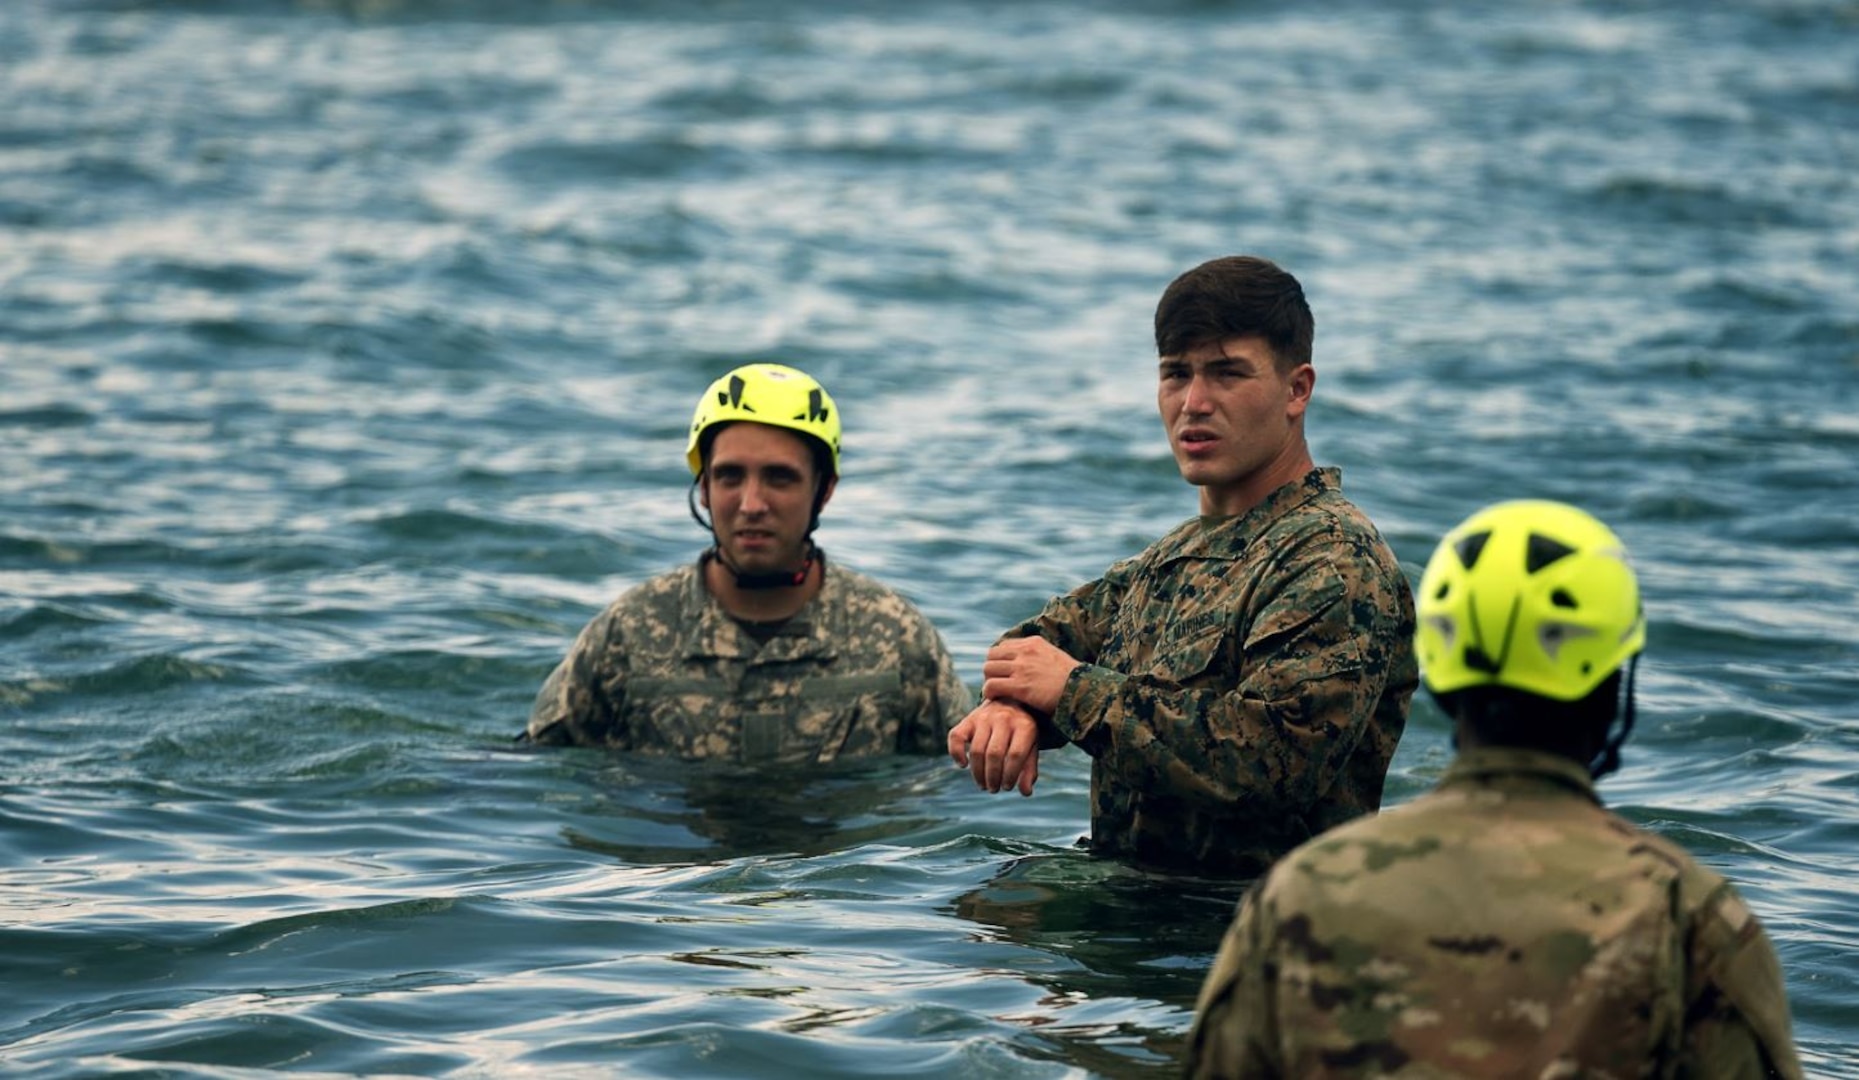 Protecting valuable assets: JTF-B conducts personnel recovery training